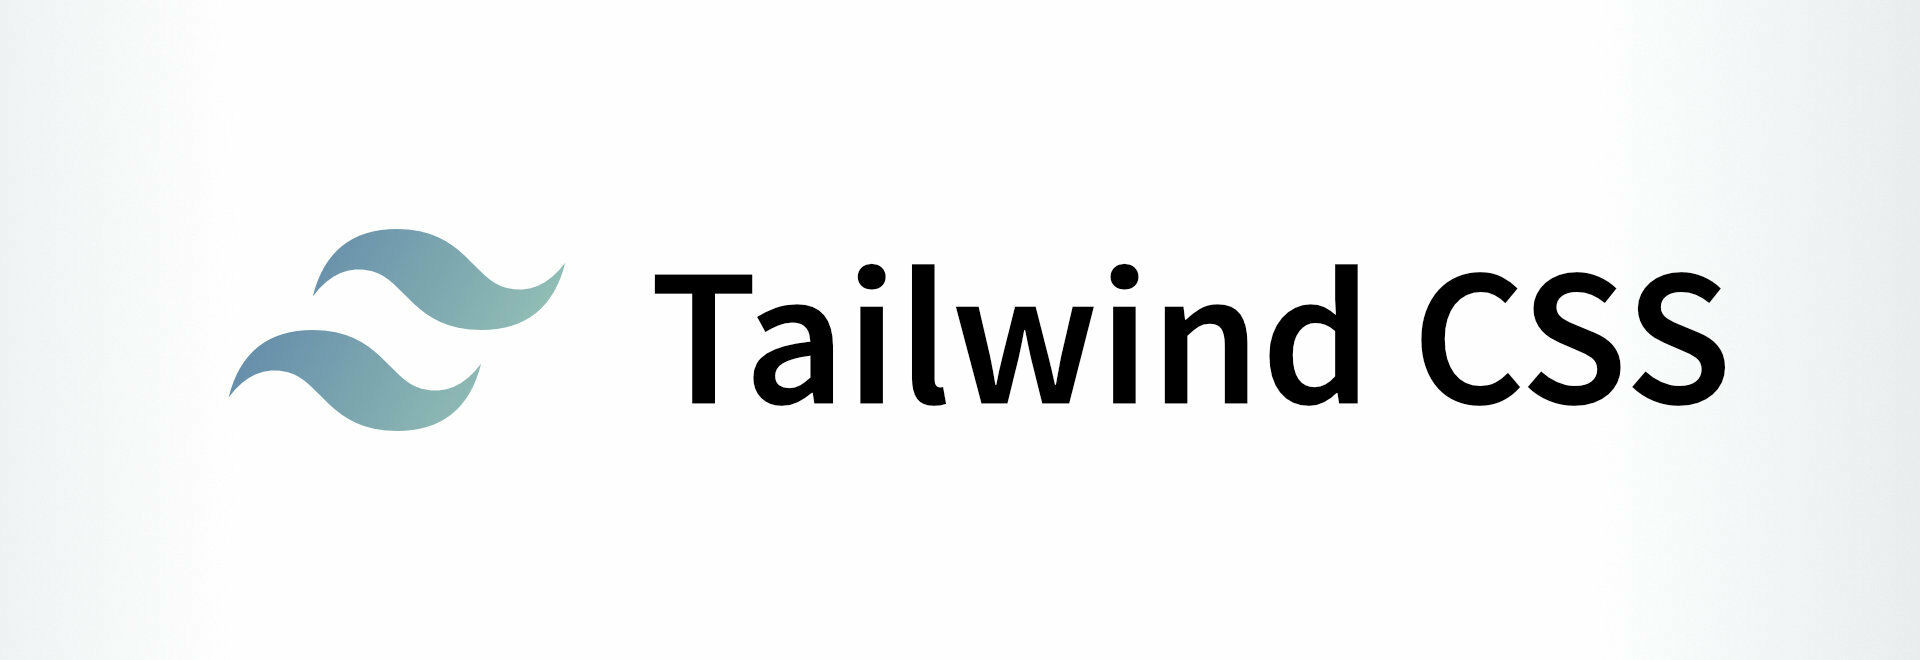 Tailwind height. Tailwind CSS. Tailwind логотип. Tailwind CSS лого. Tailwind CSS logo PNG.